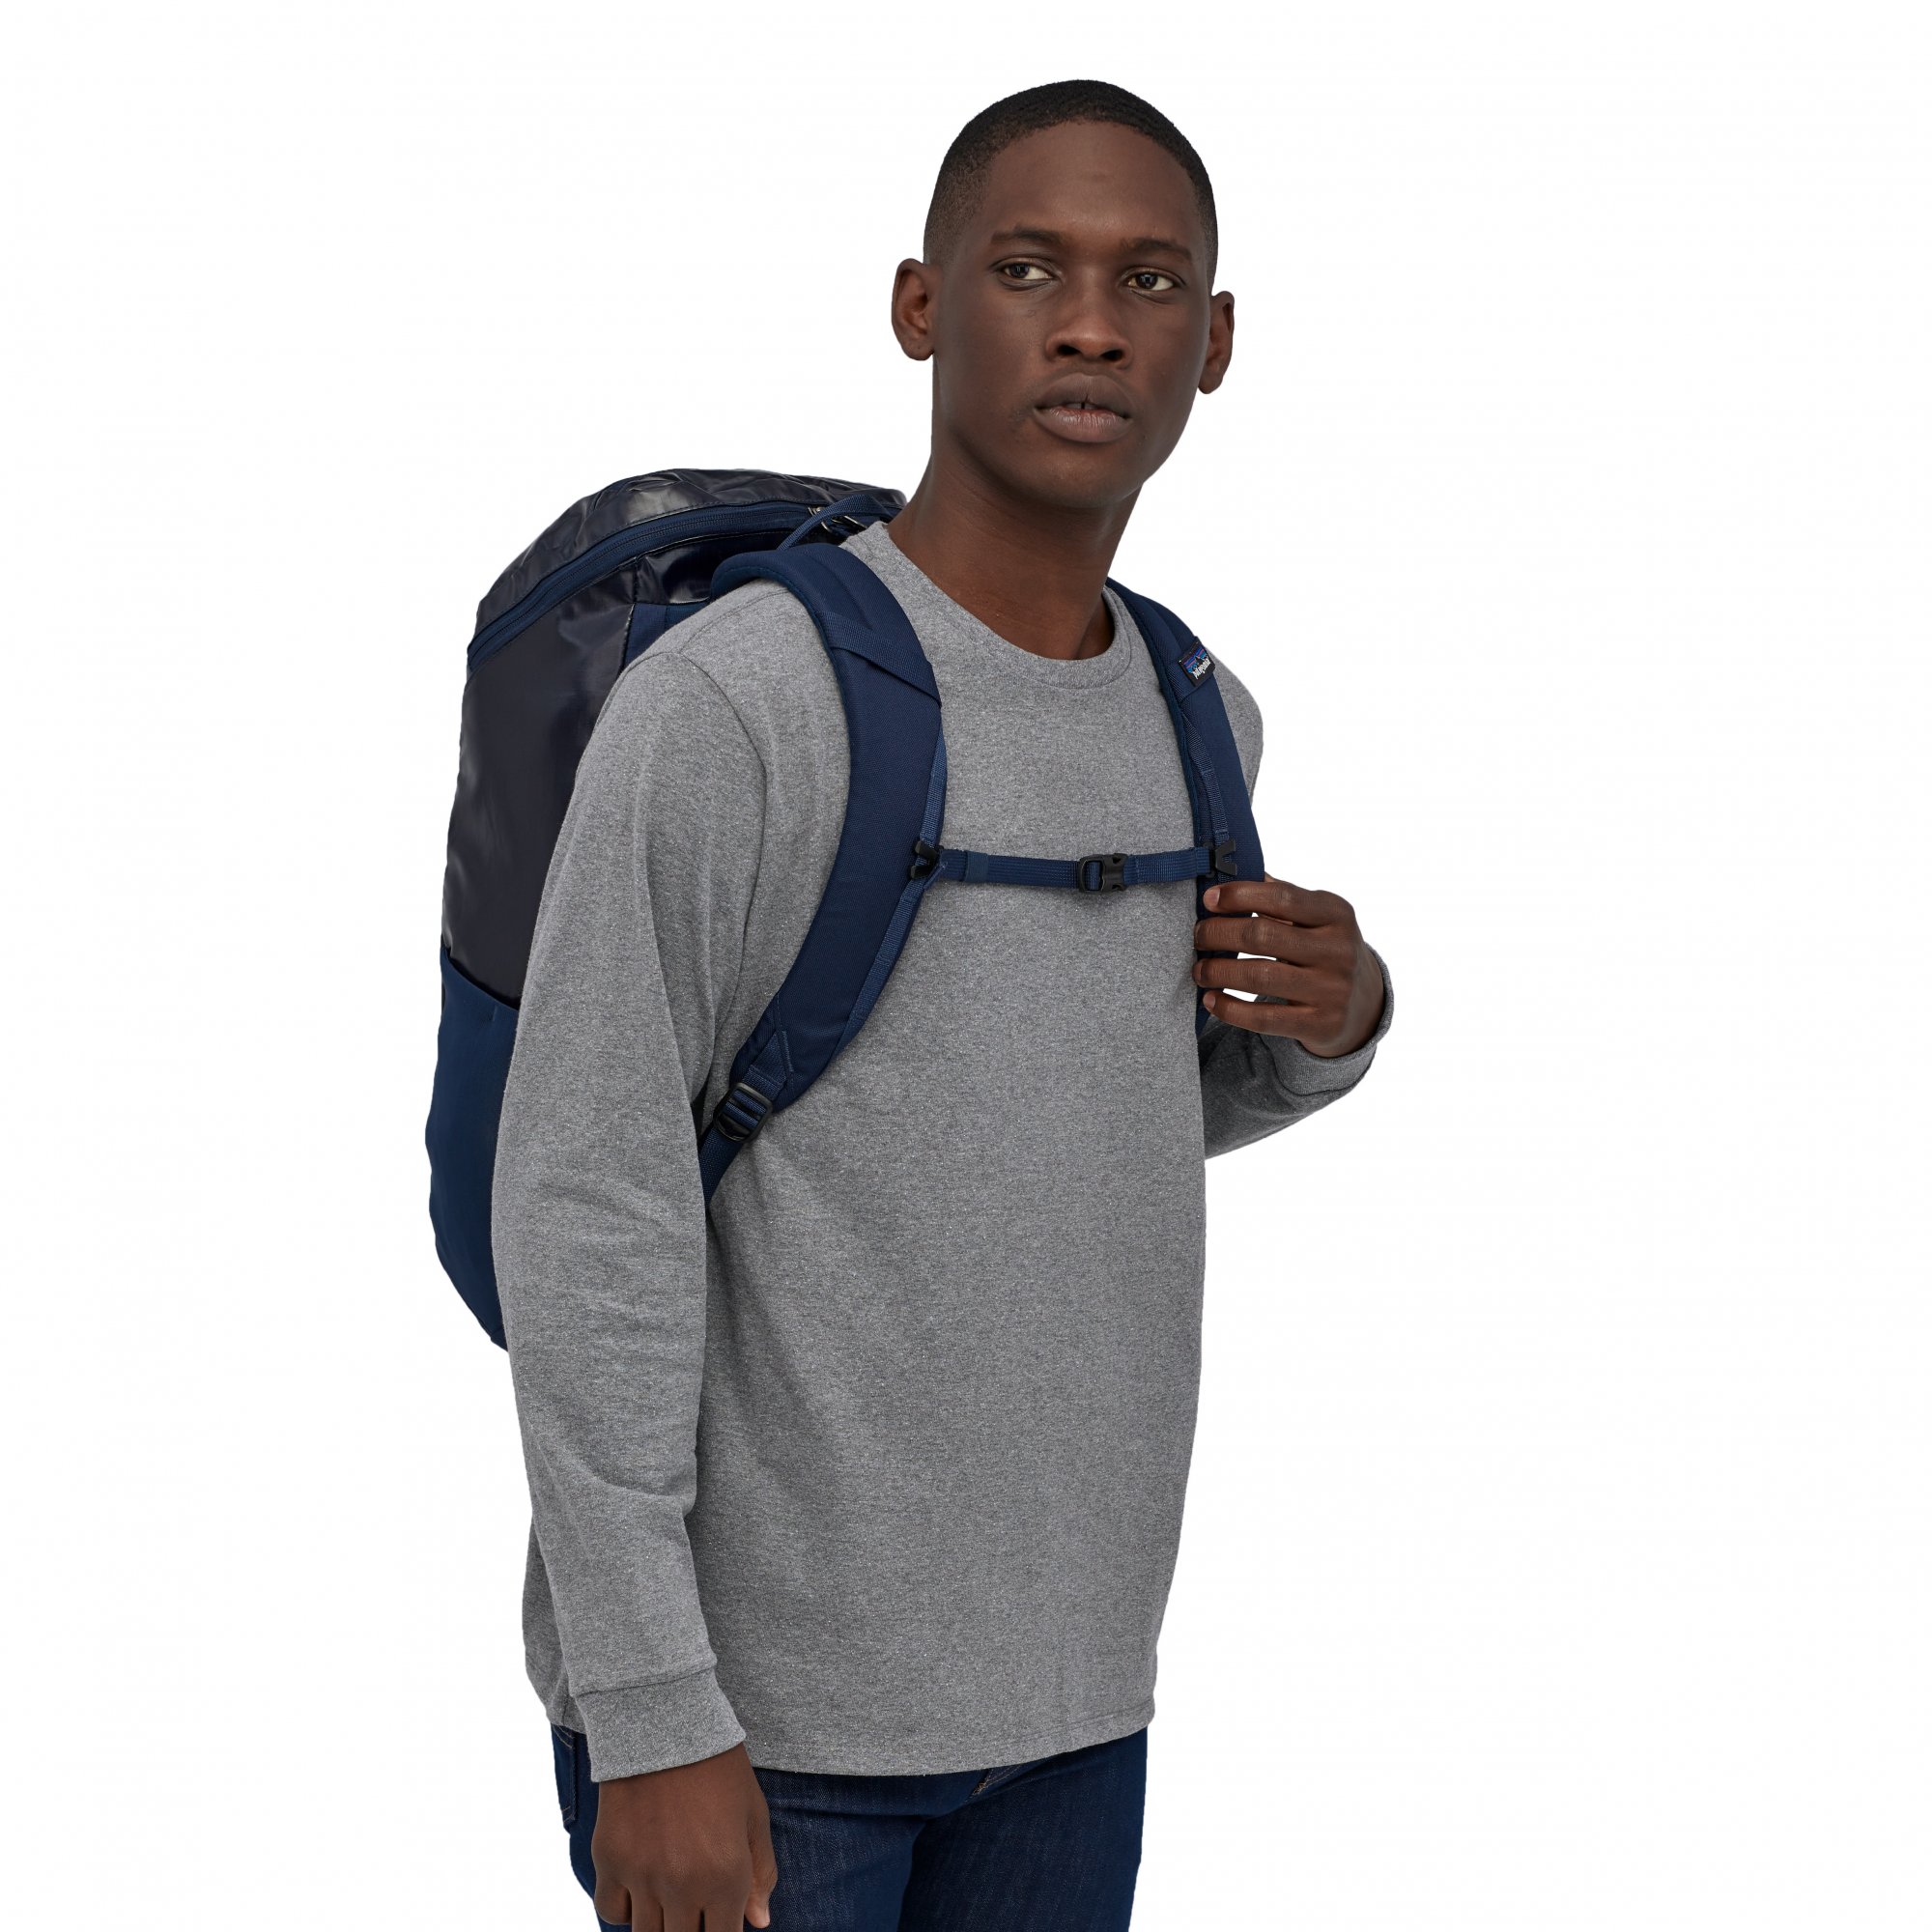 PATAGONIA Black Hole® Pack 25L Classic Navy